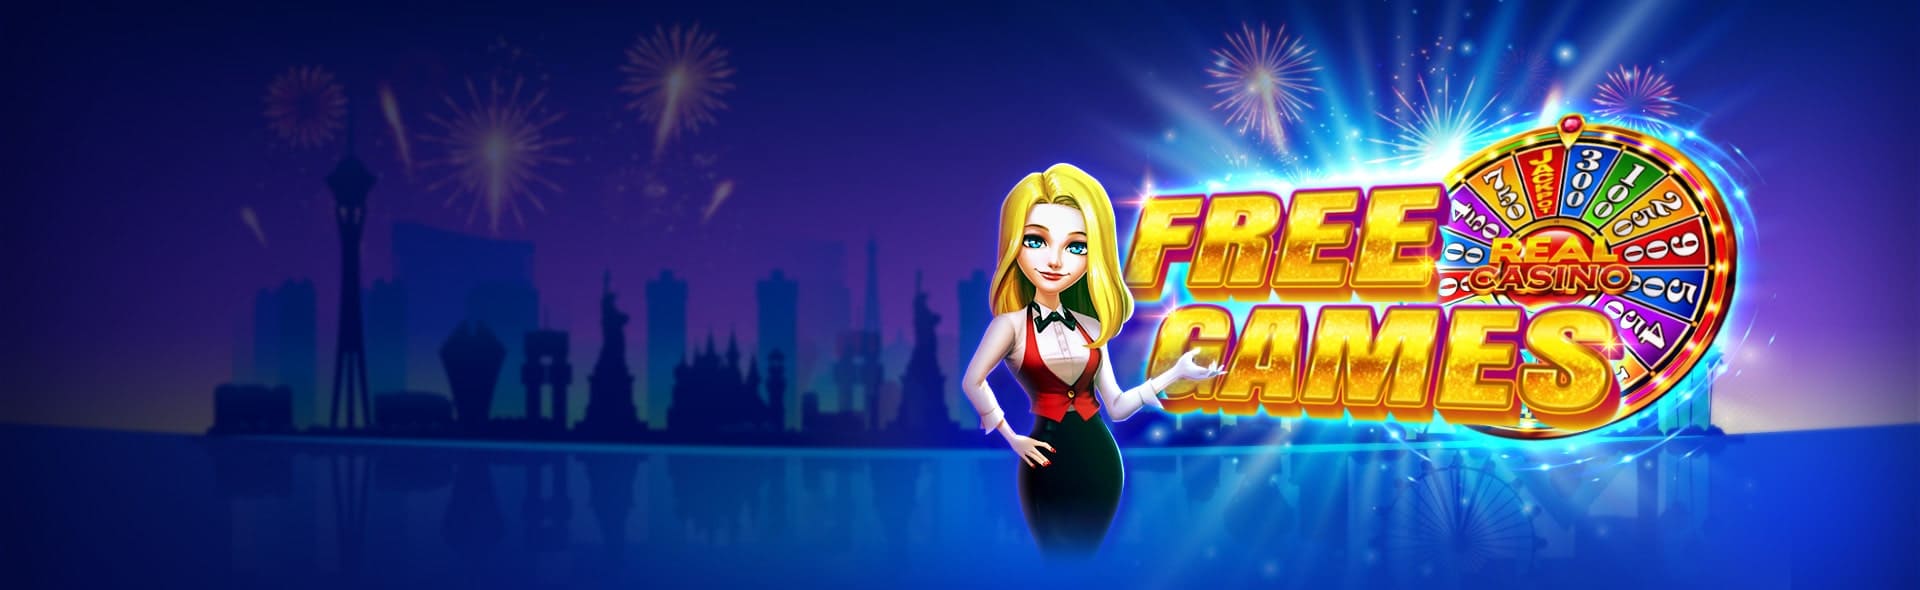 real casino online free play